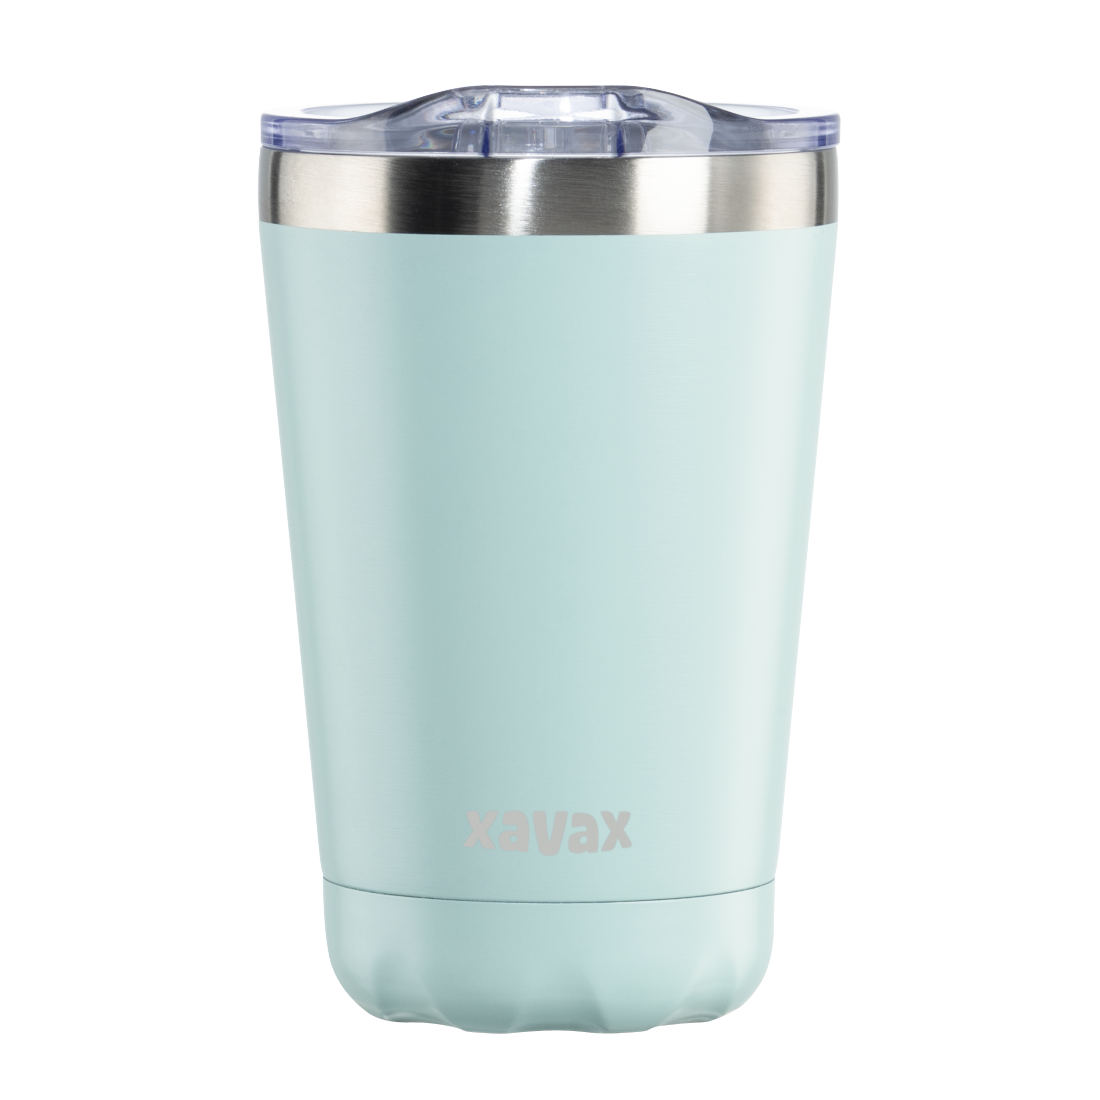 abx2 High-Res Image 2 - Xavax, Thermal Mug, 270 ml, Insulated Mug To Go with Drinks Opening, pastel blue